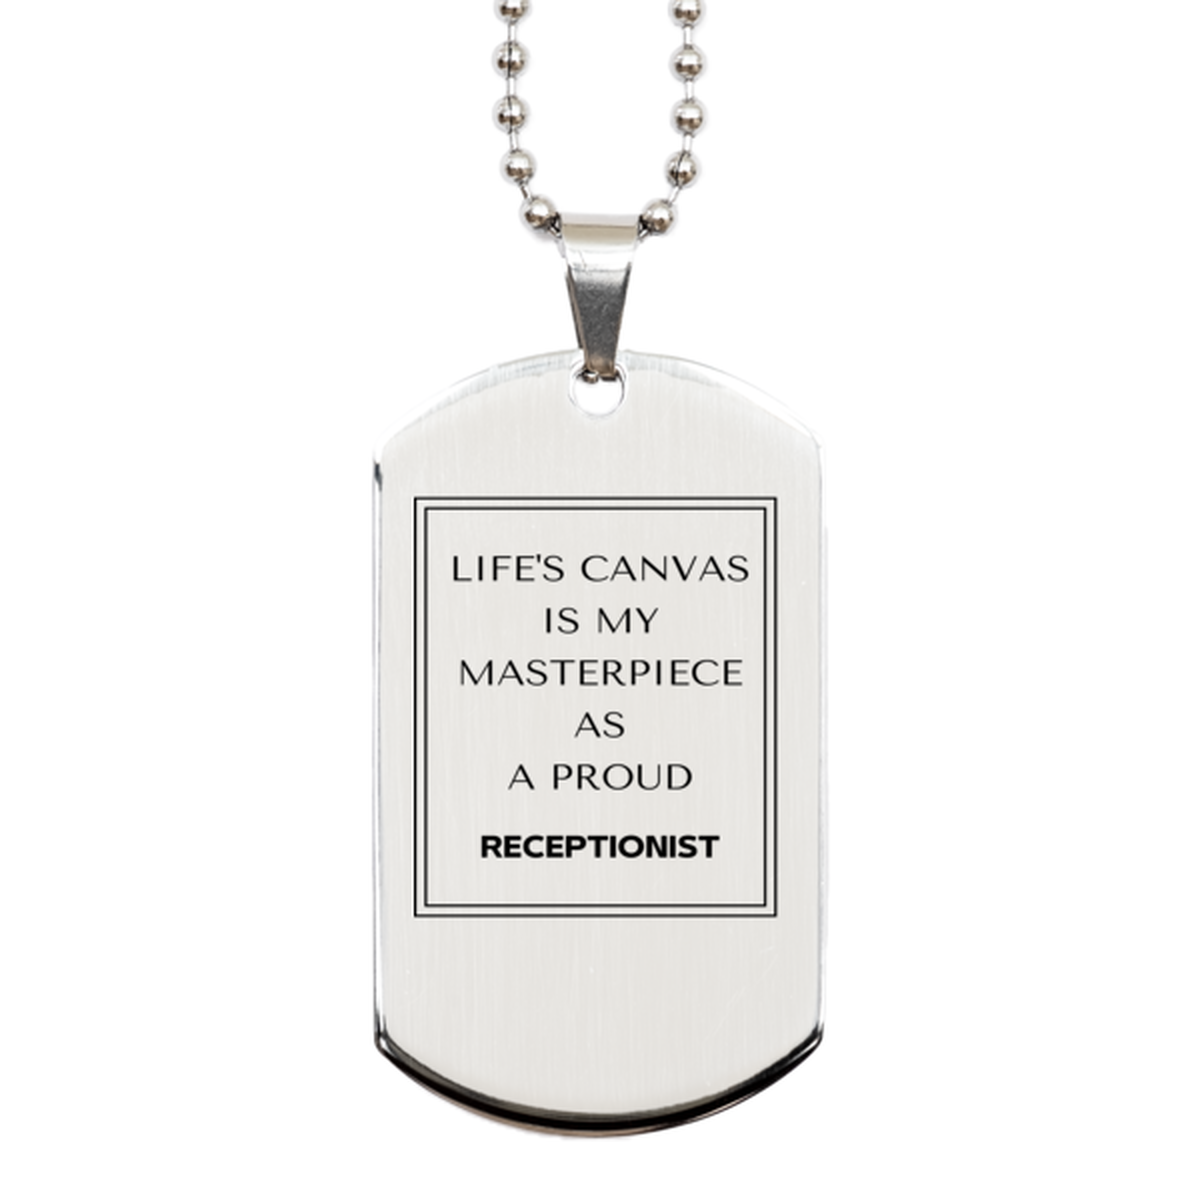 Proud Receptionist Gifts, Life's canvas is my masterpiece, Epic Birthday Christmas Unique Silver Dog Tag For Receptionist, Coworkers, Men, Women, Friends